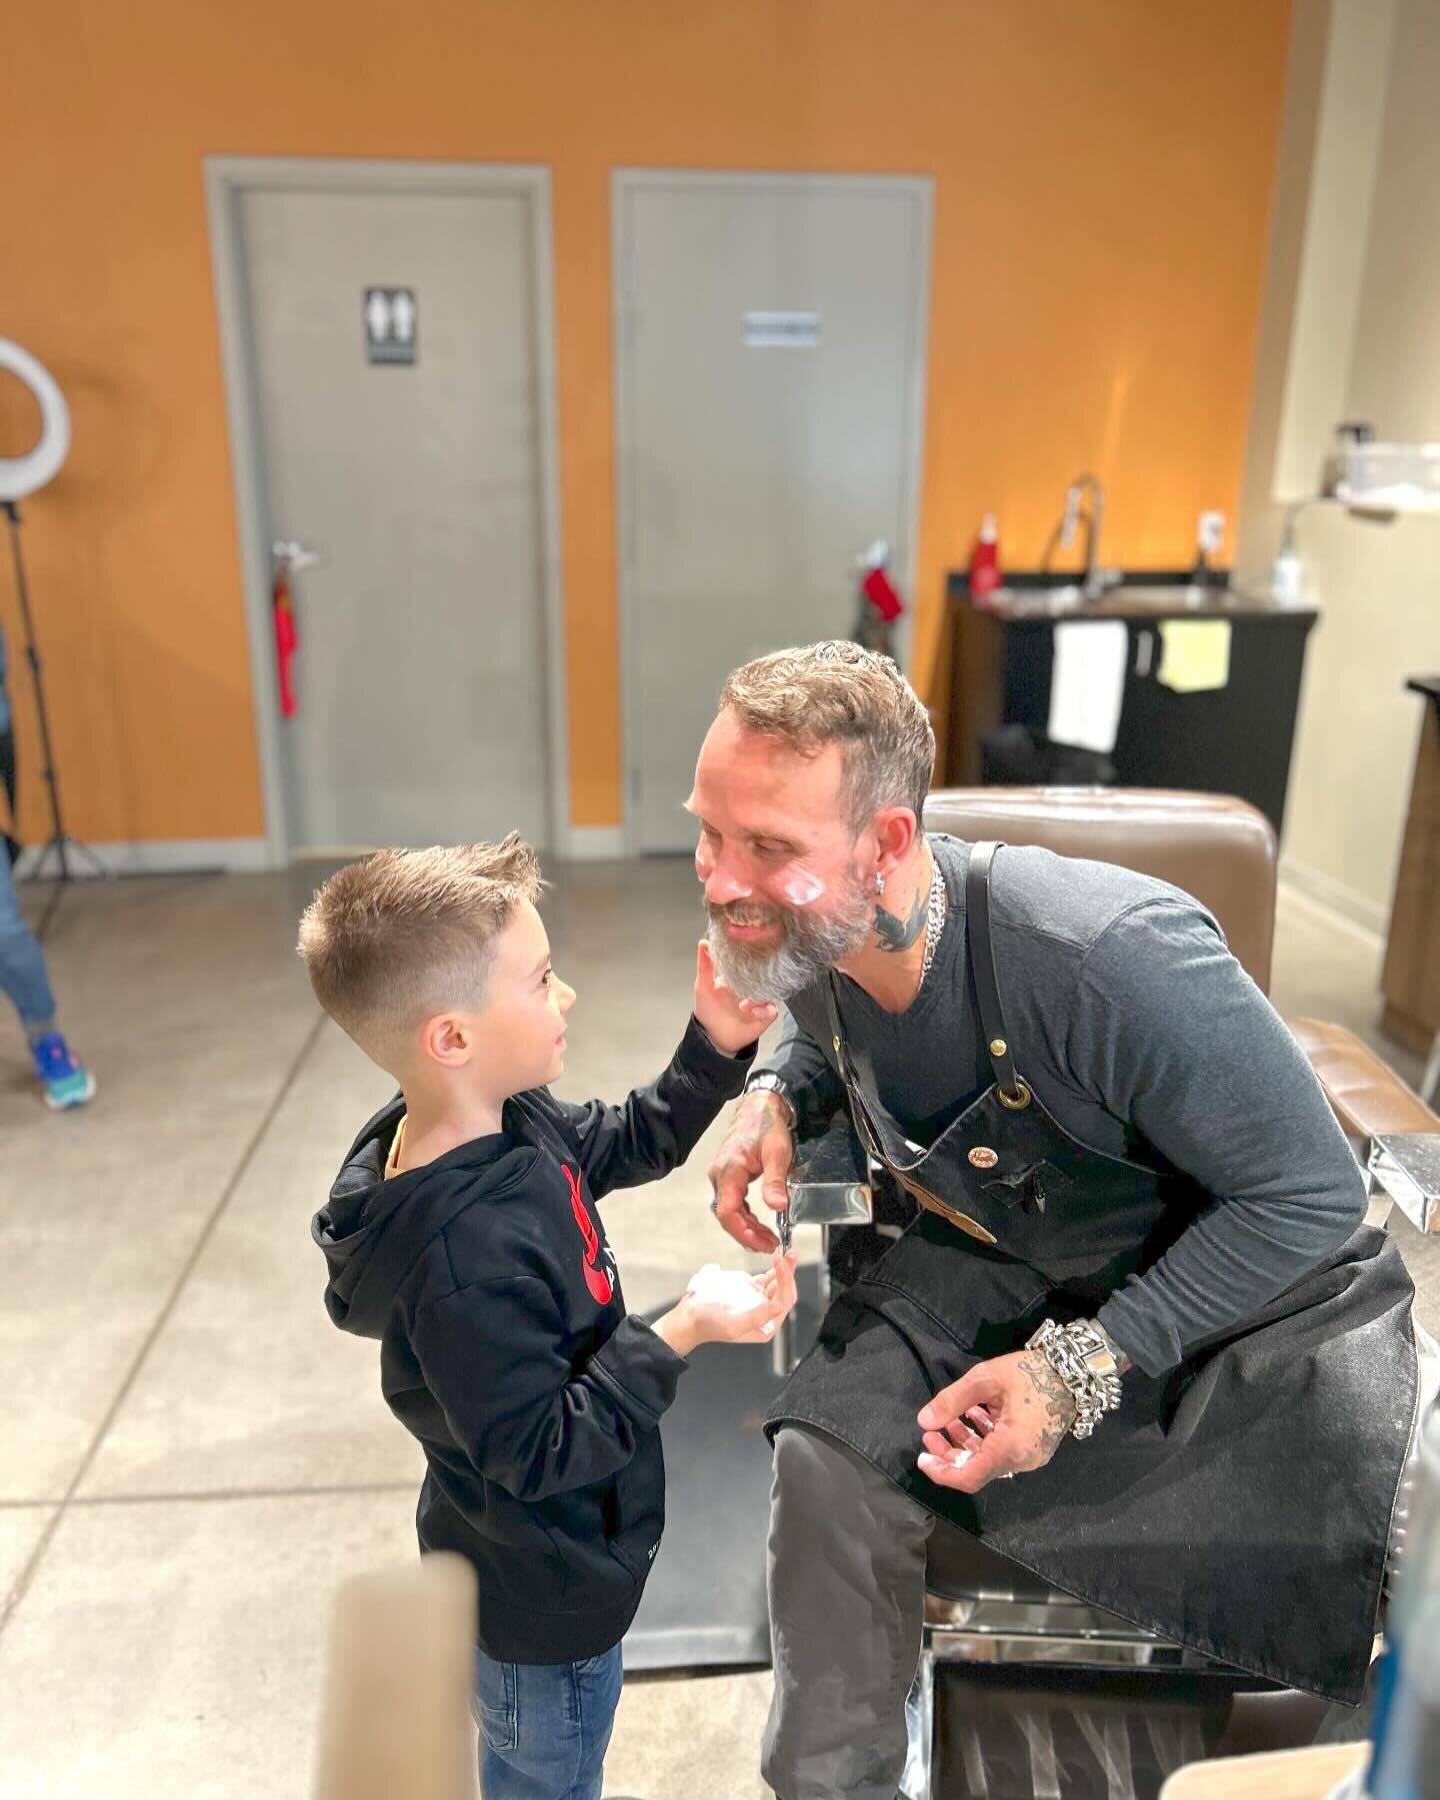 We love to make our little cubs feel like Lions! We think we do a great job of making the barbershop a fun outing instead of a scary chore. 

These pictures are so stinking cute! Great job uncle @russian.barber

#ottawa #barbershopforkids #boyscuts #